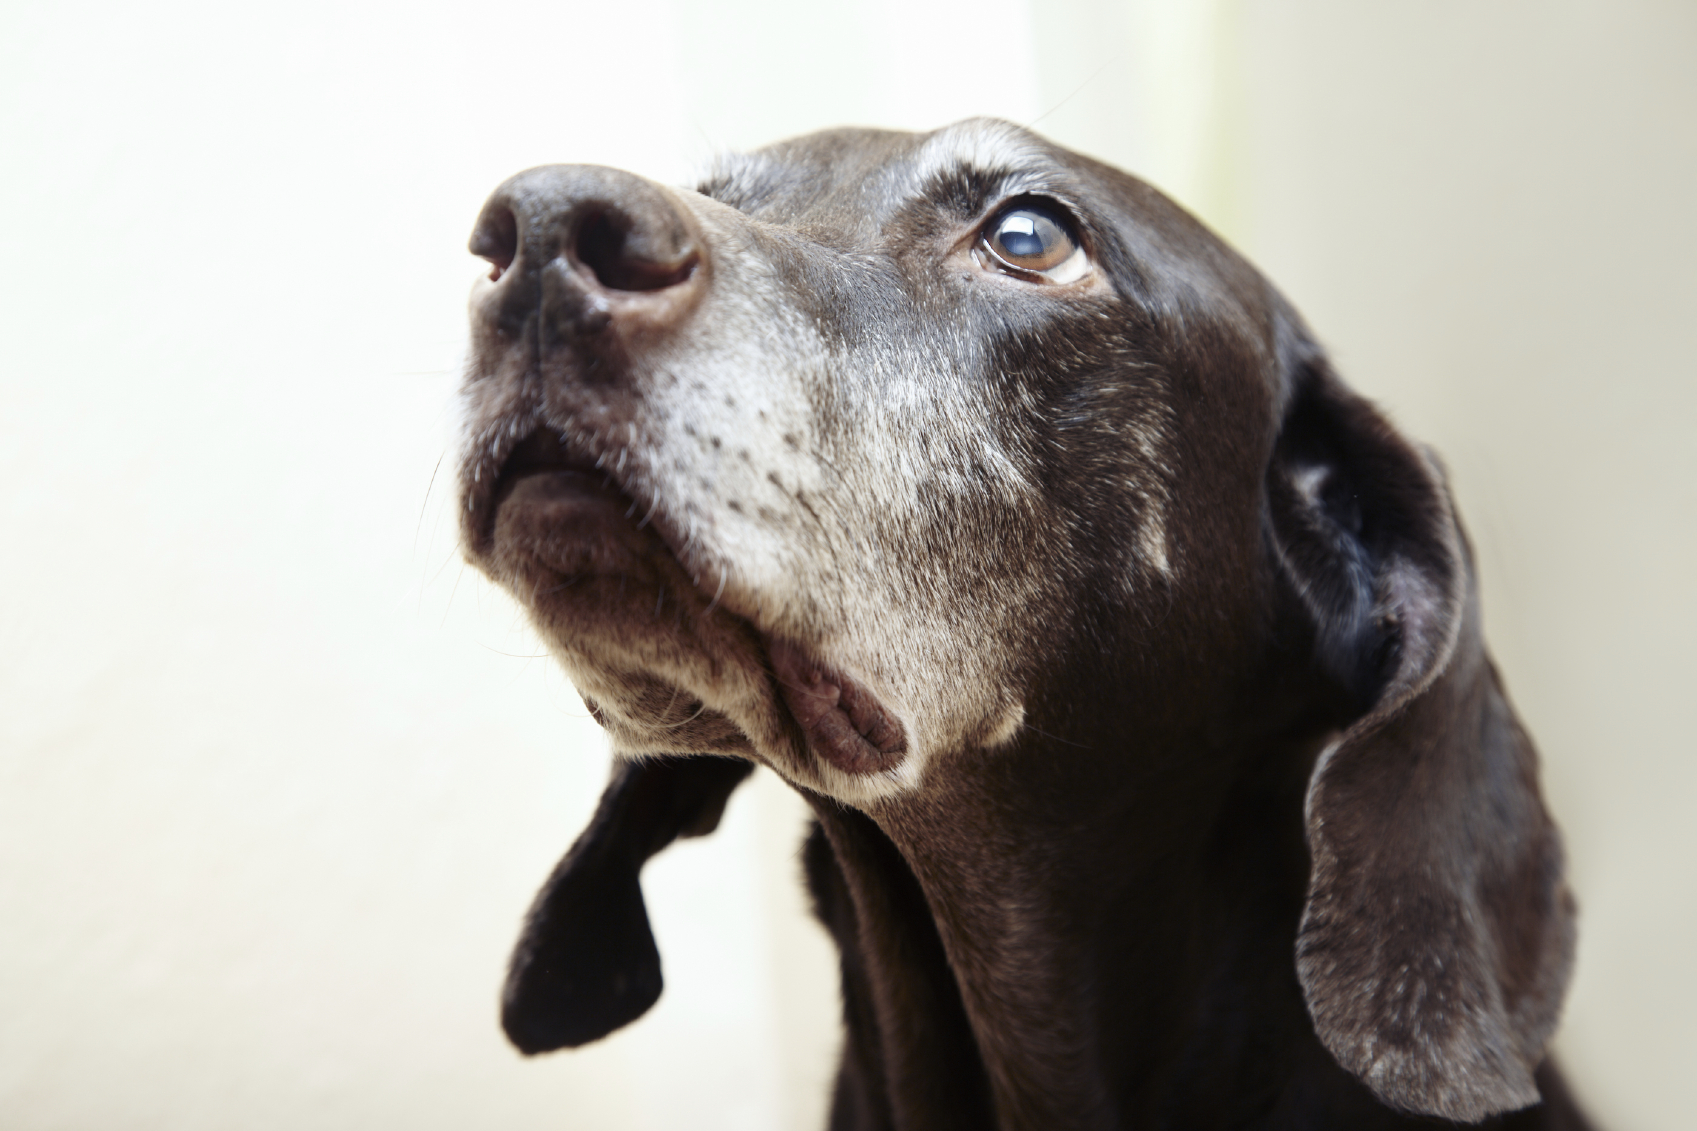 Just like people, dogs suffer memory problems as they age. In fact, more than 30% of older dogs have dementia.